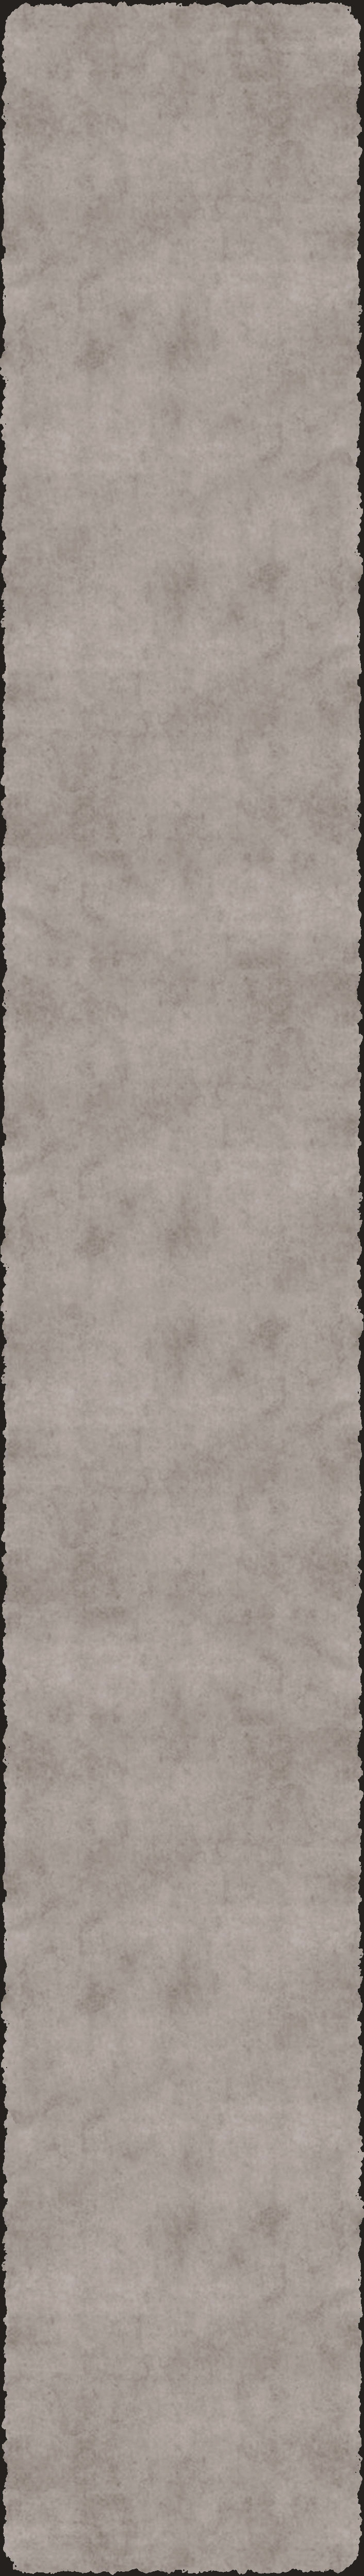 Parchment Background Image for My Projects: Screenshots, Page 3 on FlightToAtlantis.net